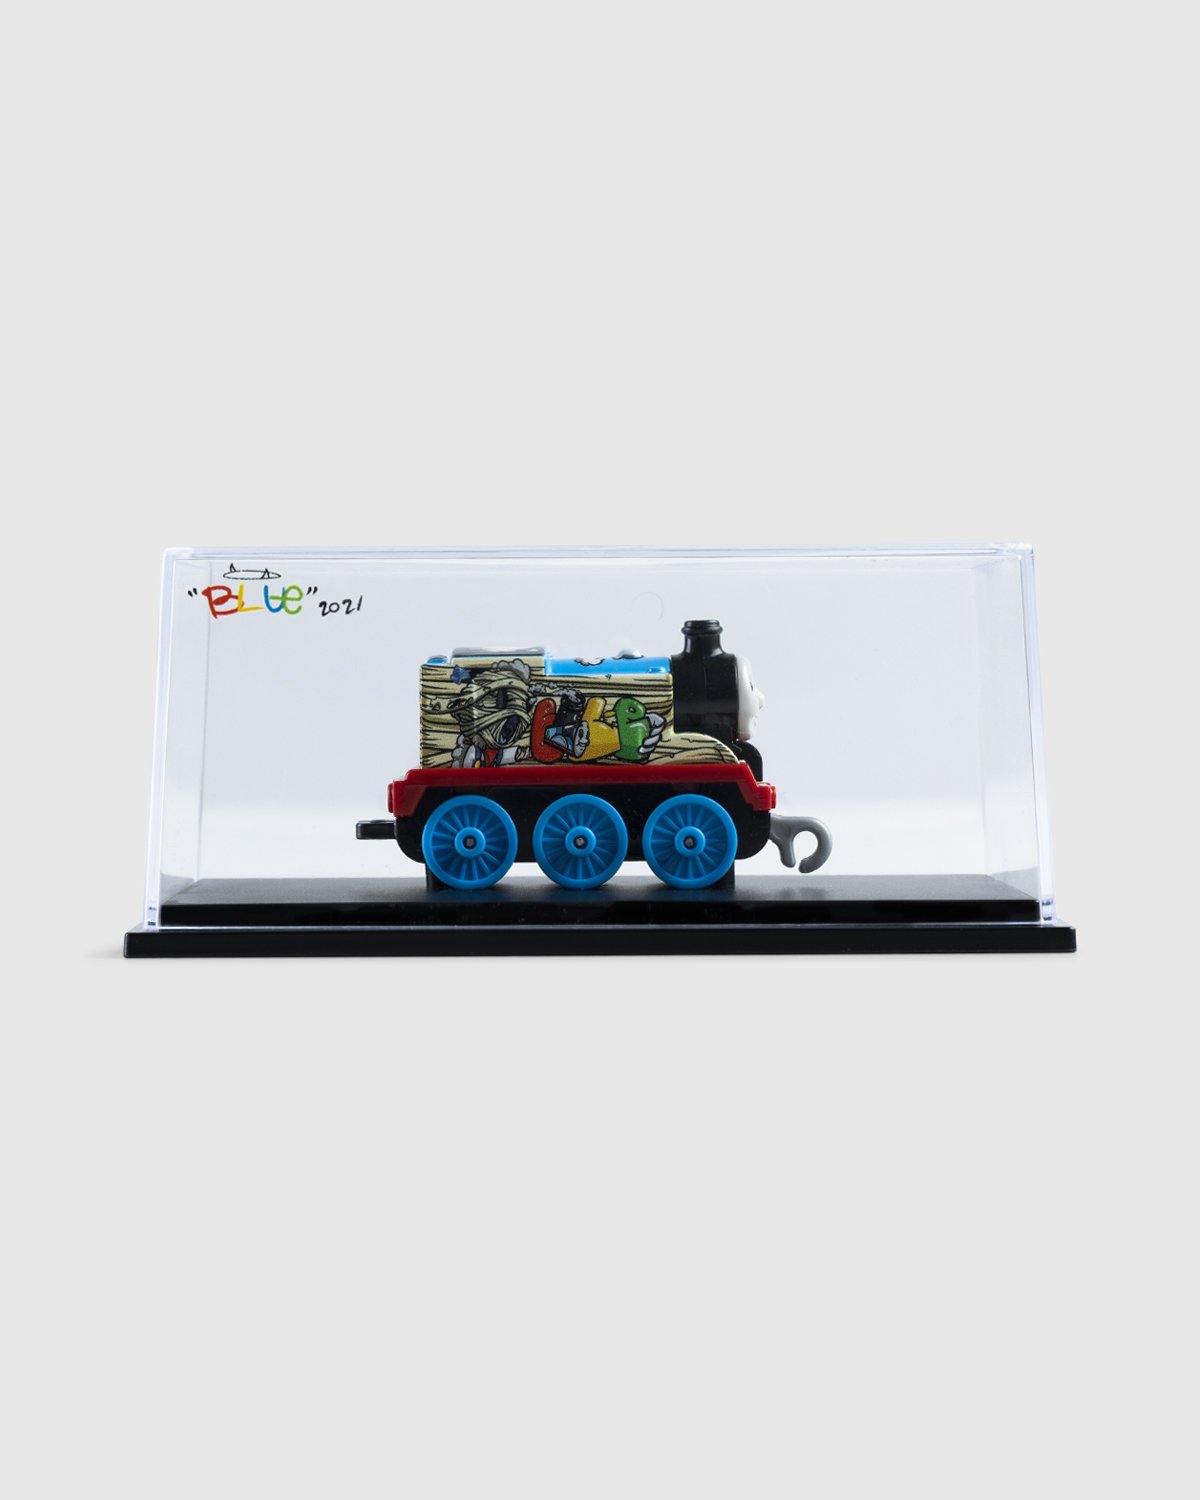 Mattel Creations x Blue the Great - Thomas the Tank Engine Diecast - Lifestyle - Blue - Image 1